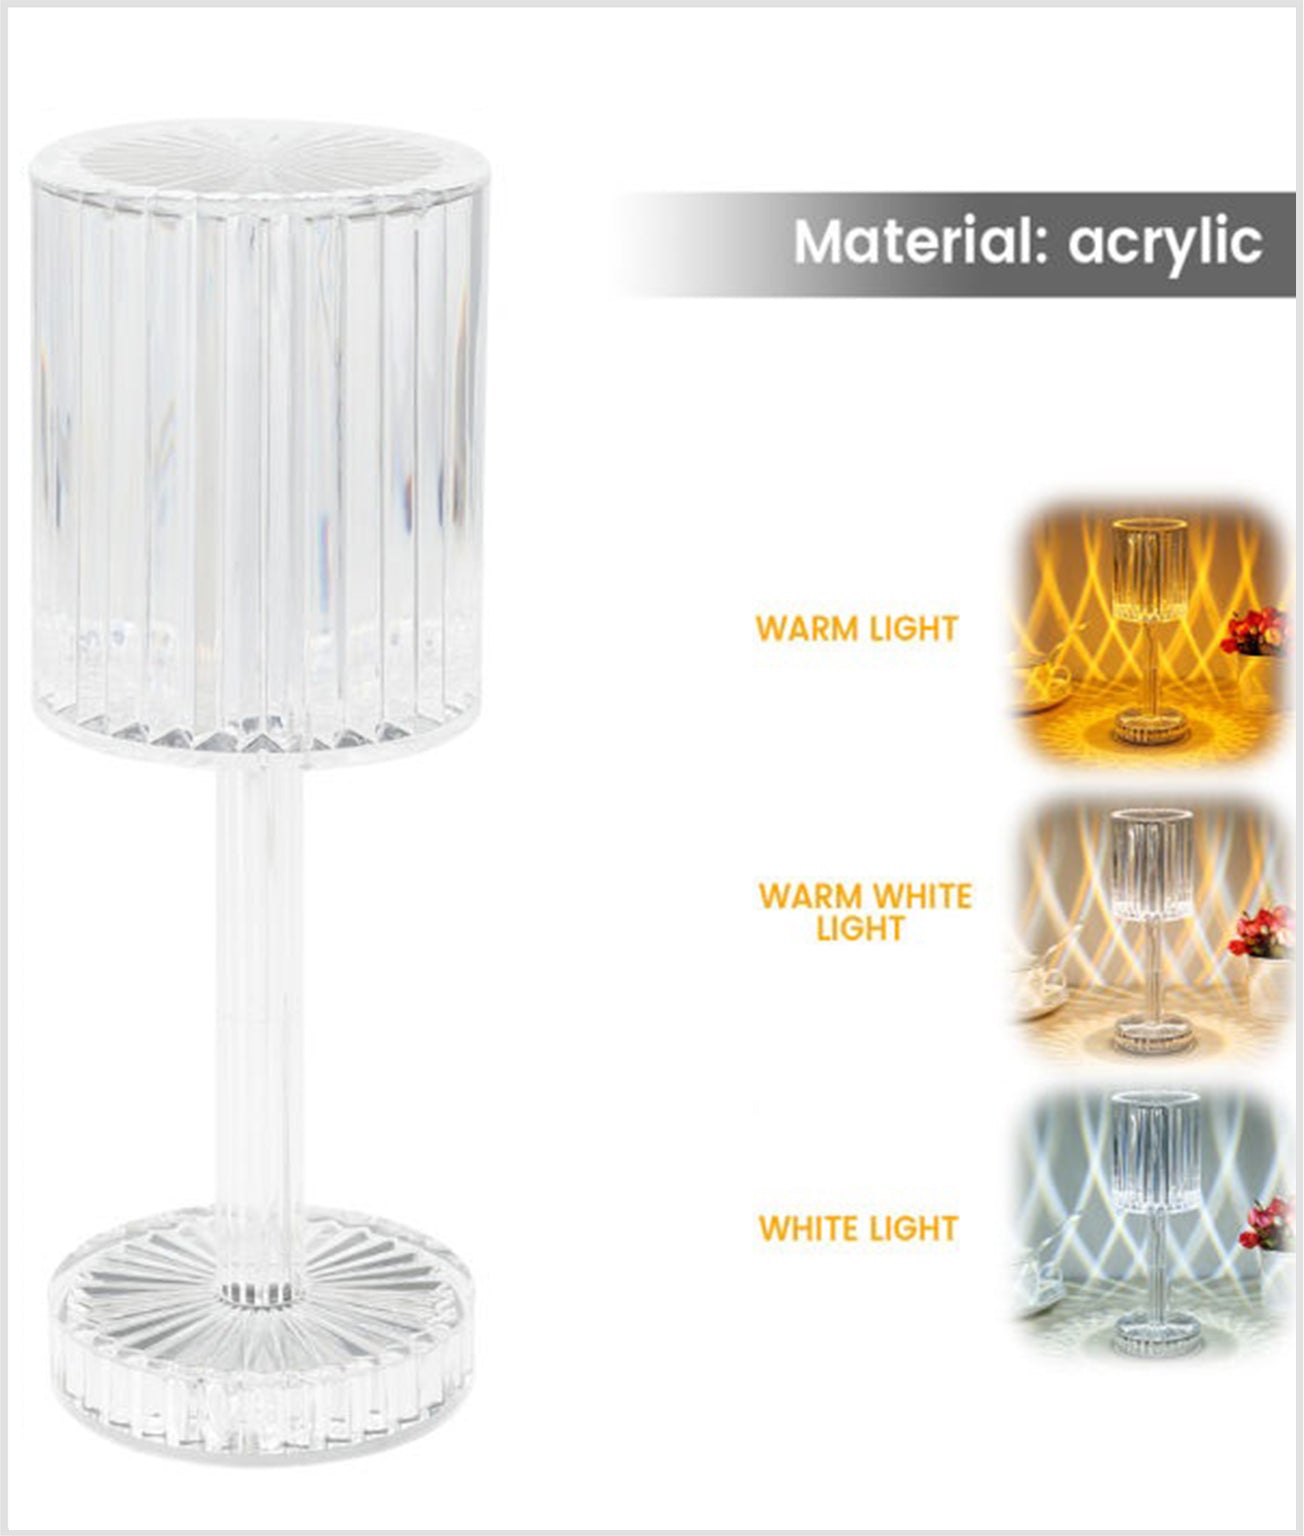 Acrylic Diamond Crystal Rechargeable Table Lamp Beautiful Ambiance Light For Dinning Table, Bedroom & Party Night